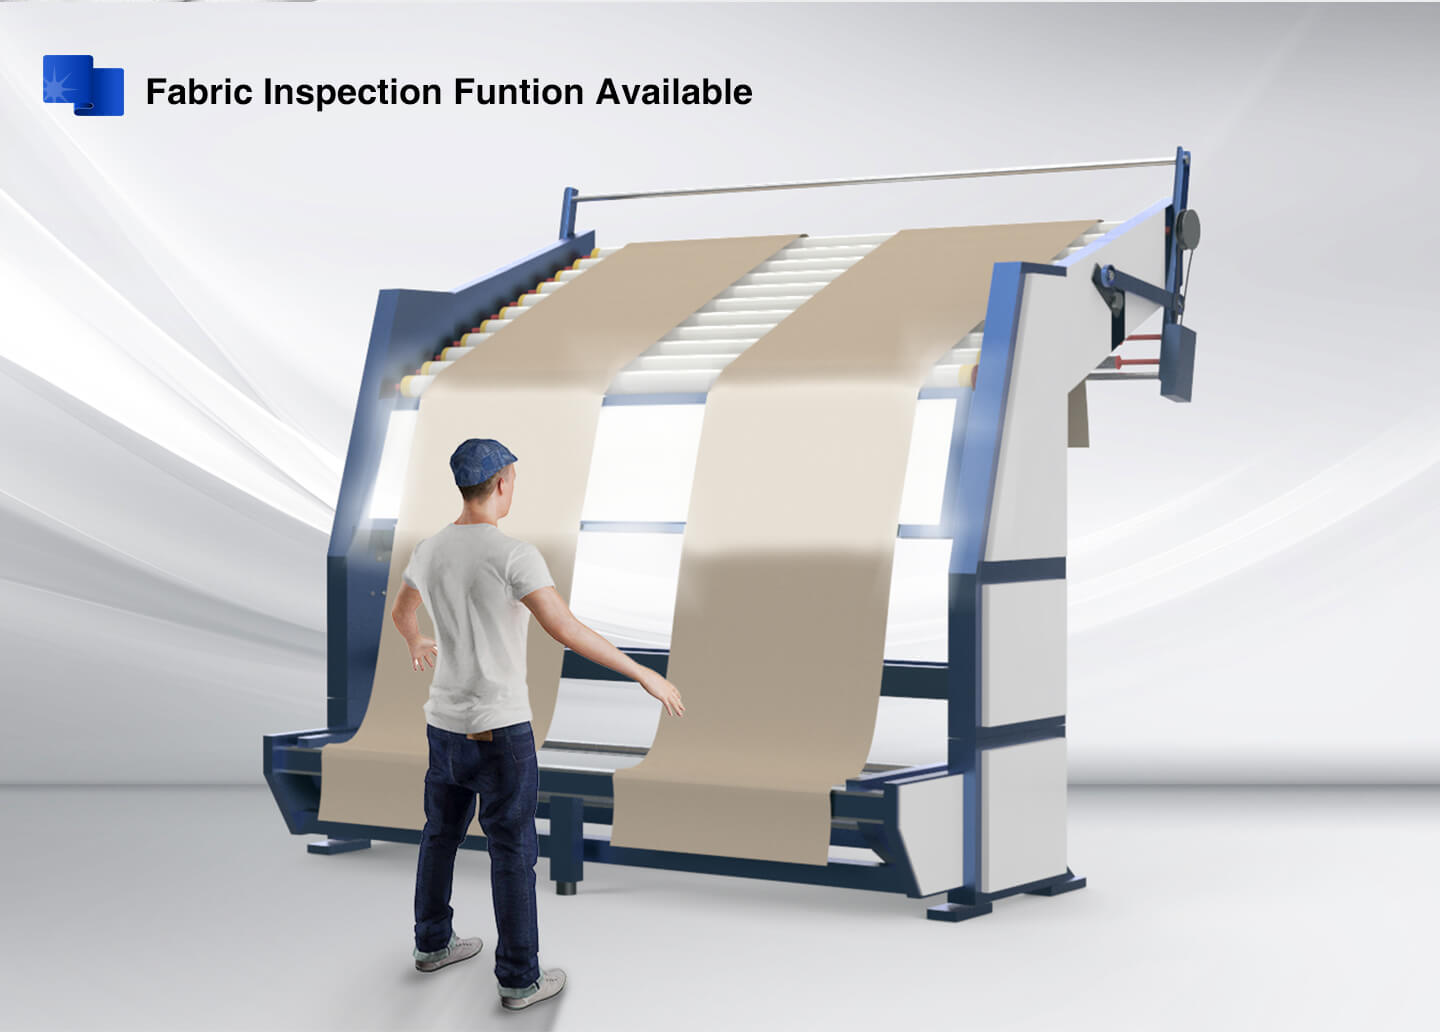 fabric relaxing machine conveyor type with inspection function